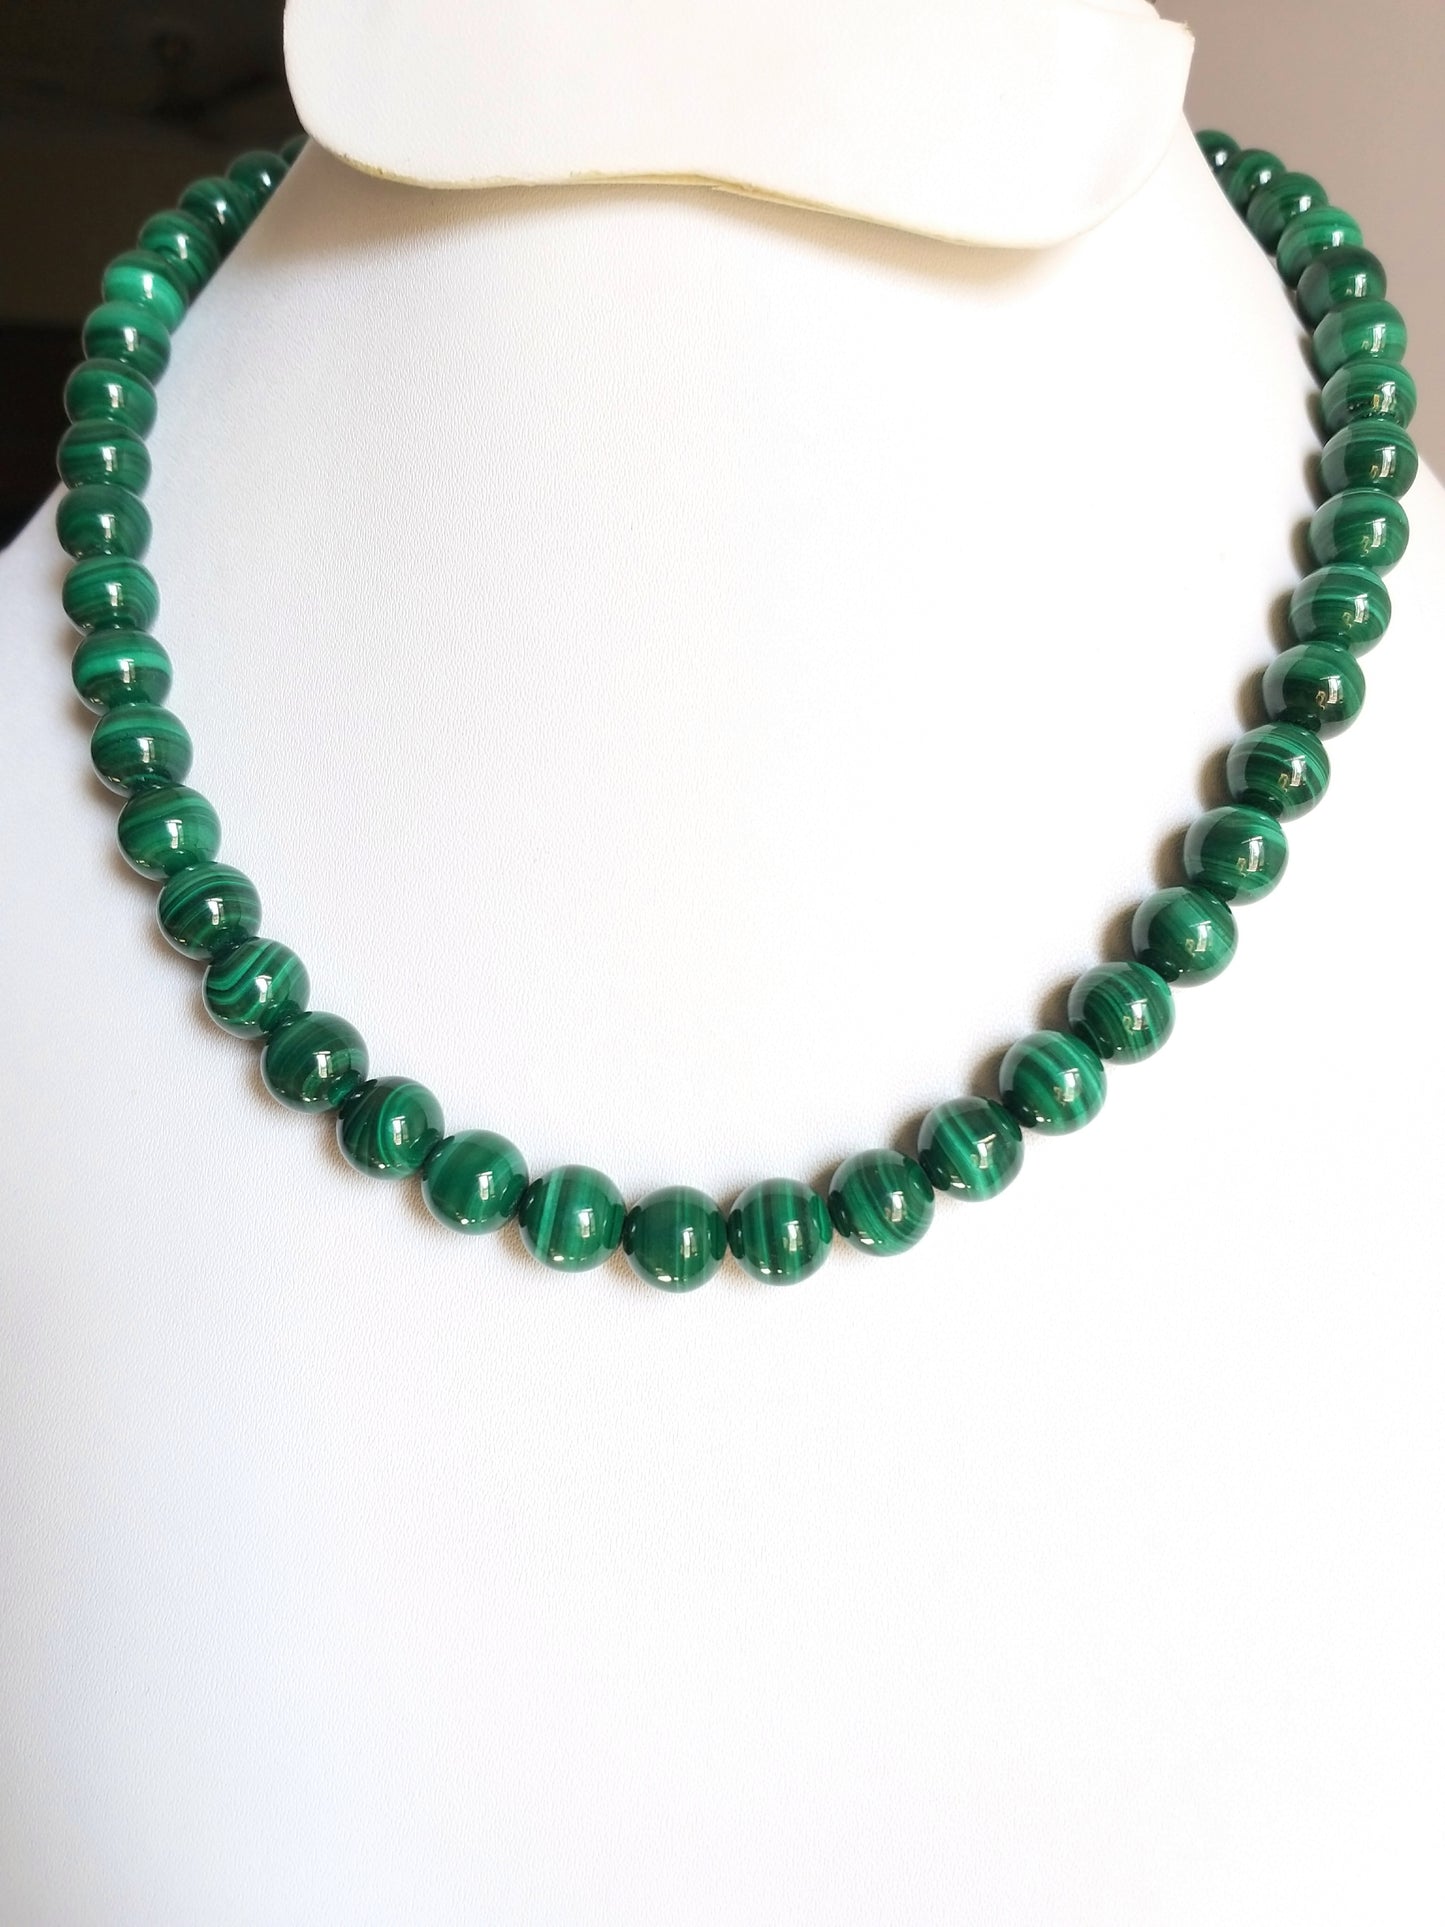 Natural Malachite Beads Necklace, Large Green Beads Necklace